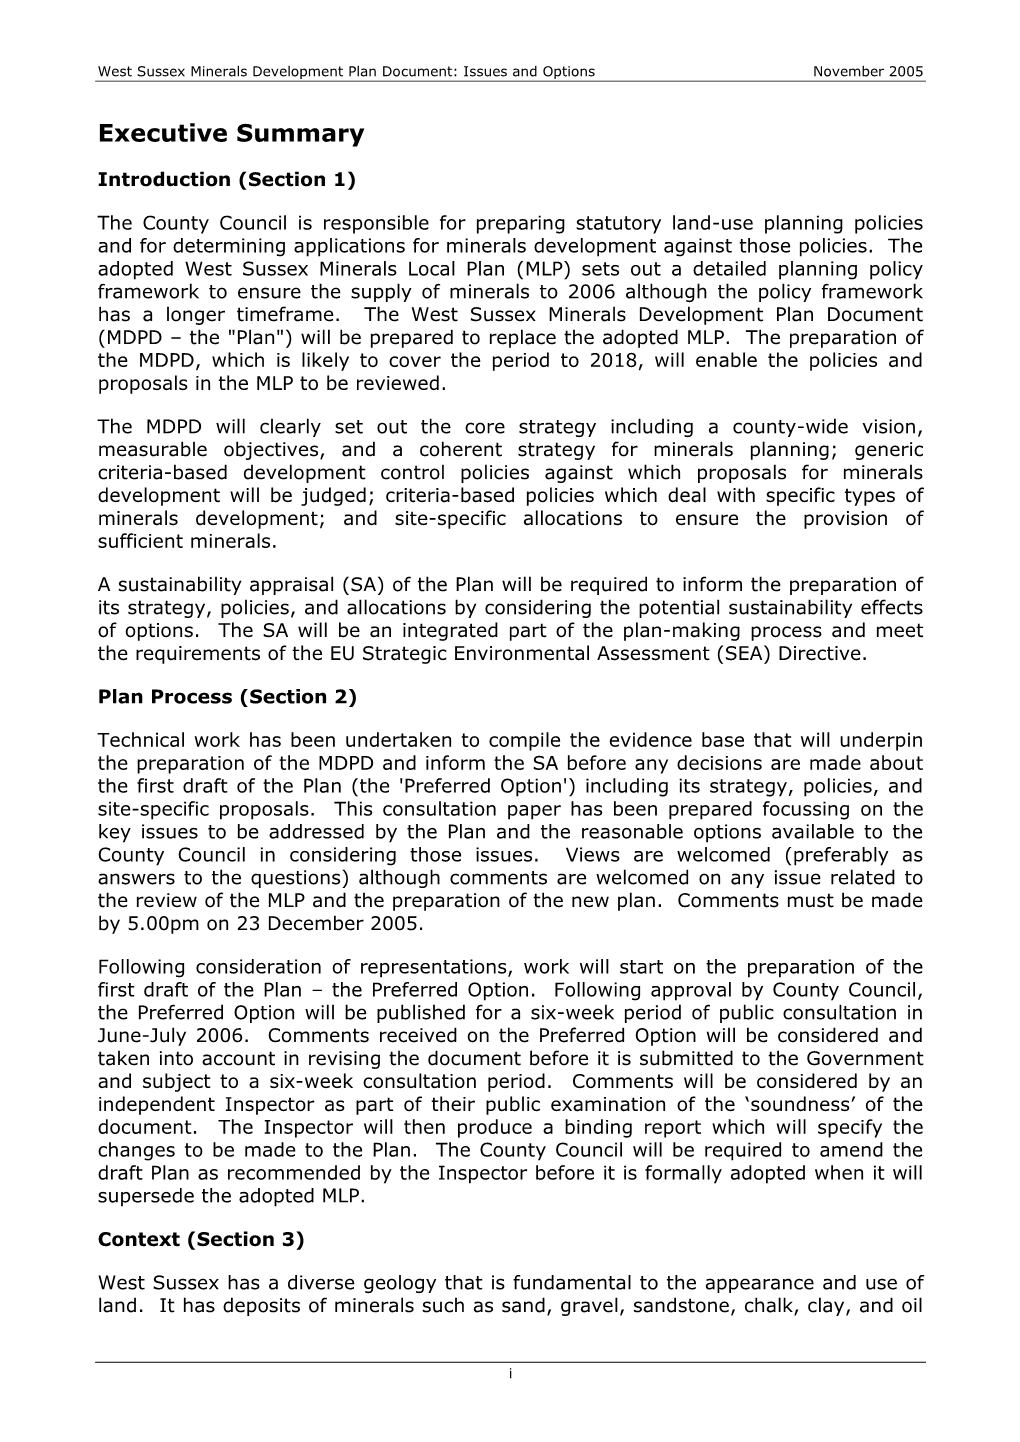 West Sussex Minerals Development Plan Document: Issues and Options November 2005